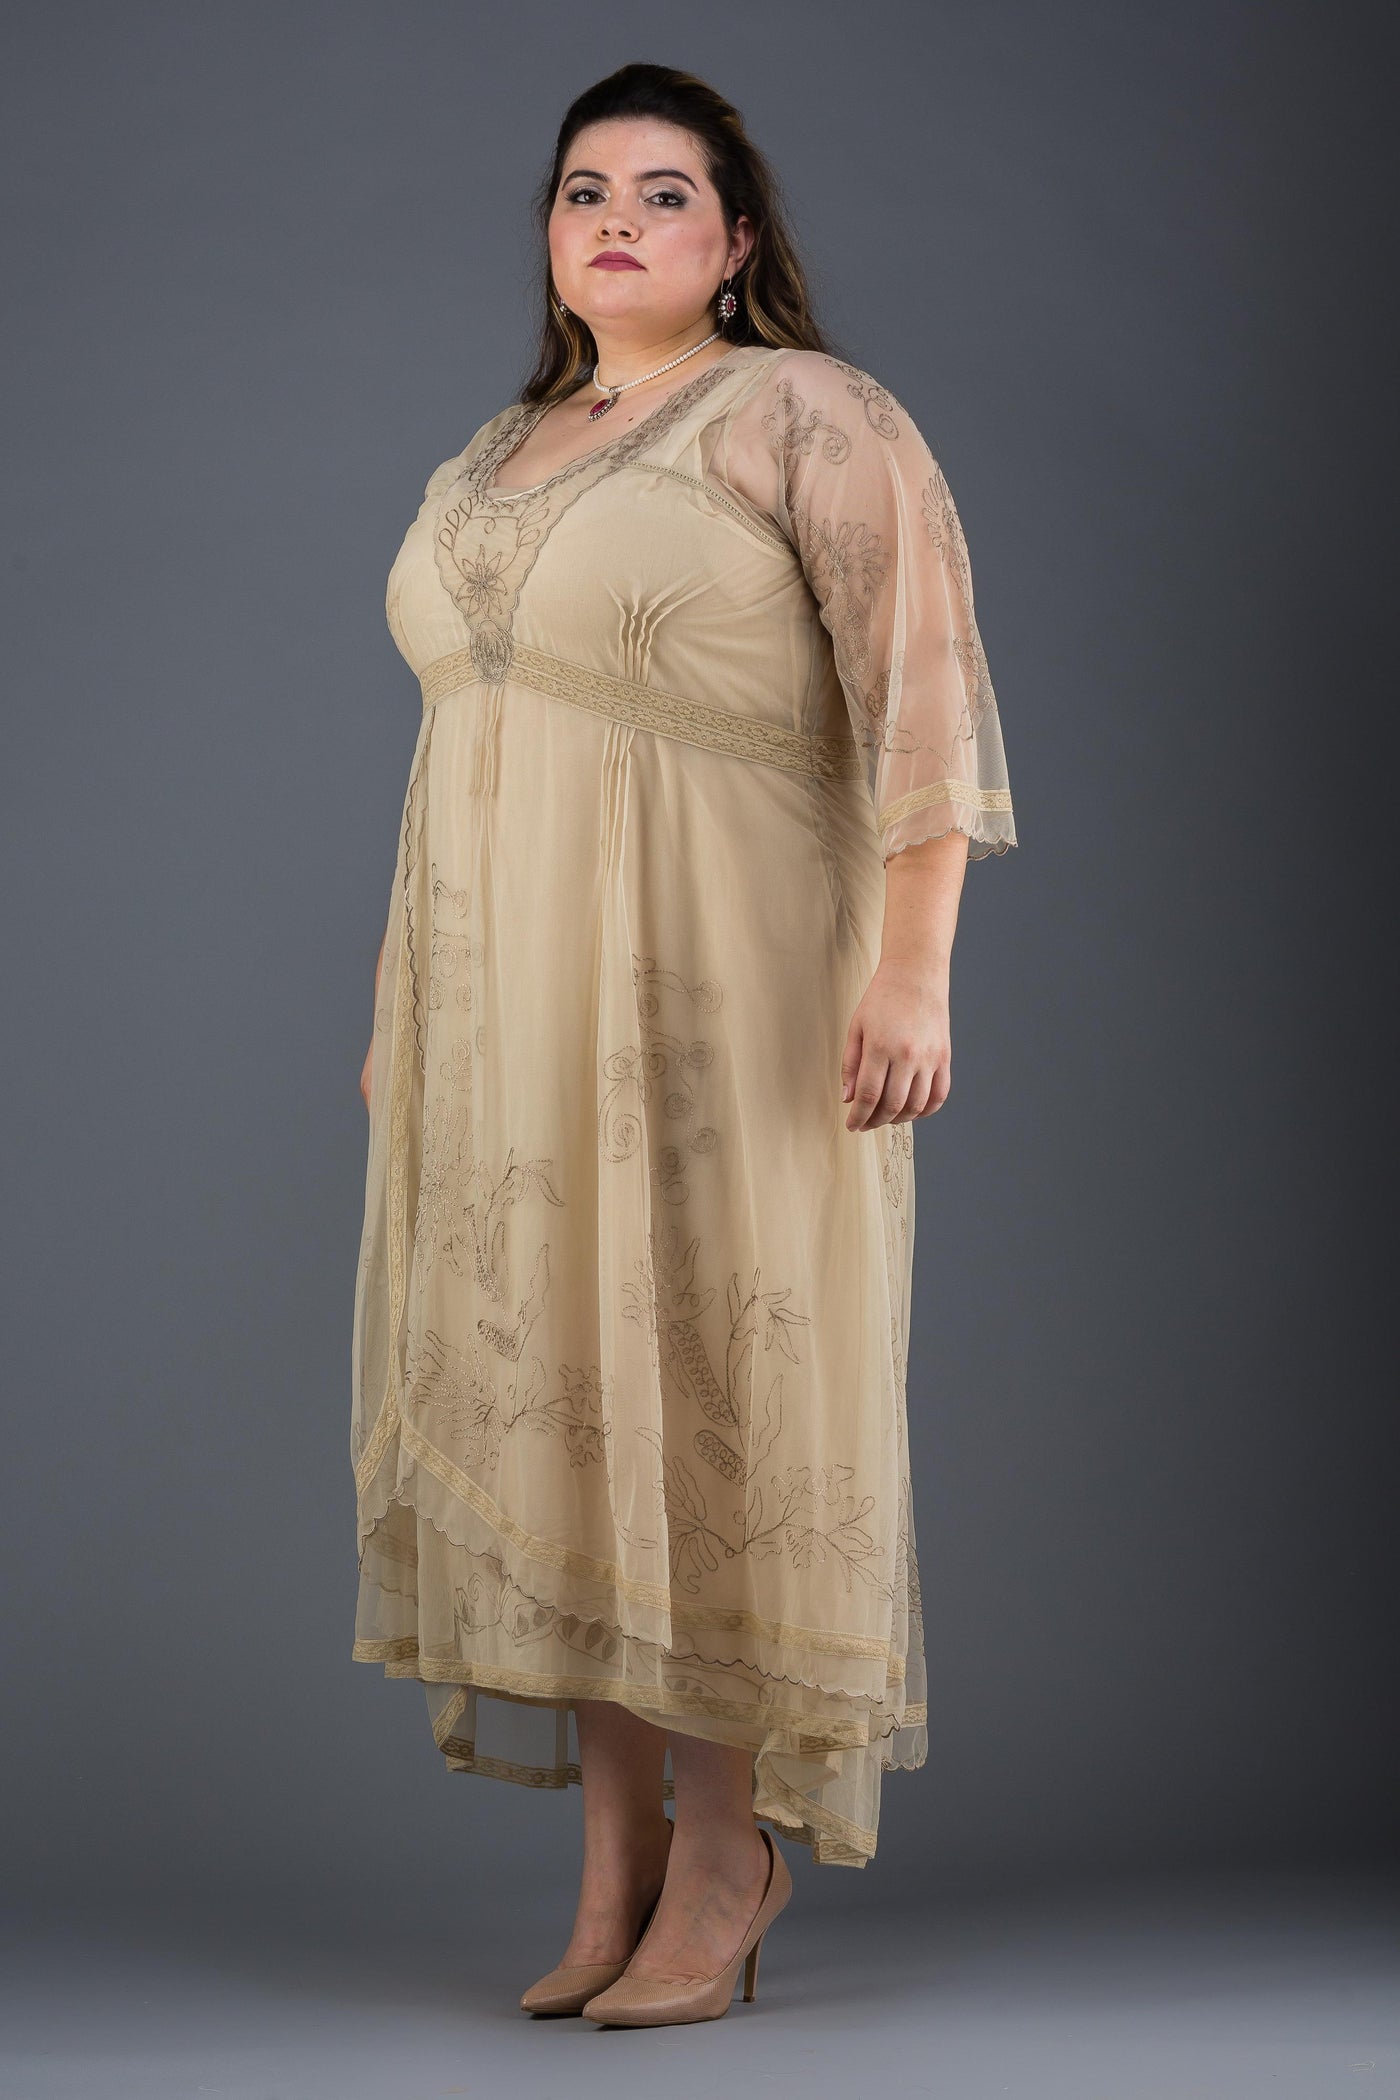 Plus SIze Downton Abbey Gown in Pearl by Nataya